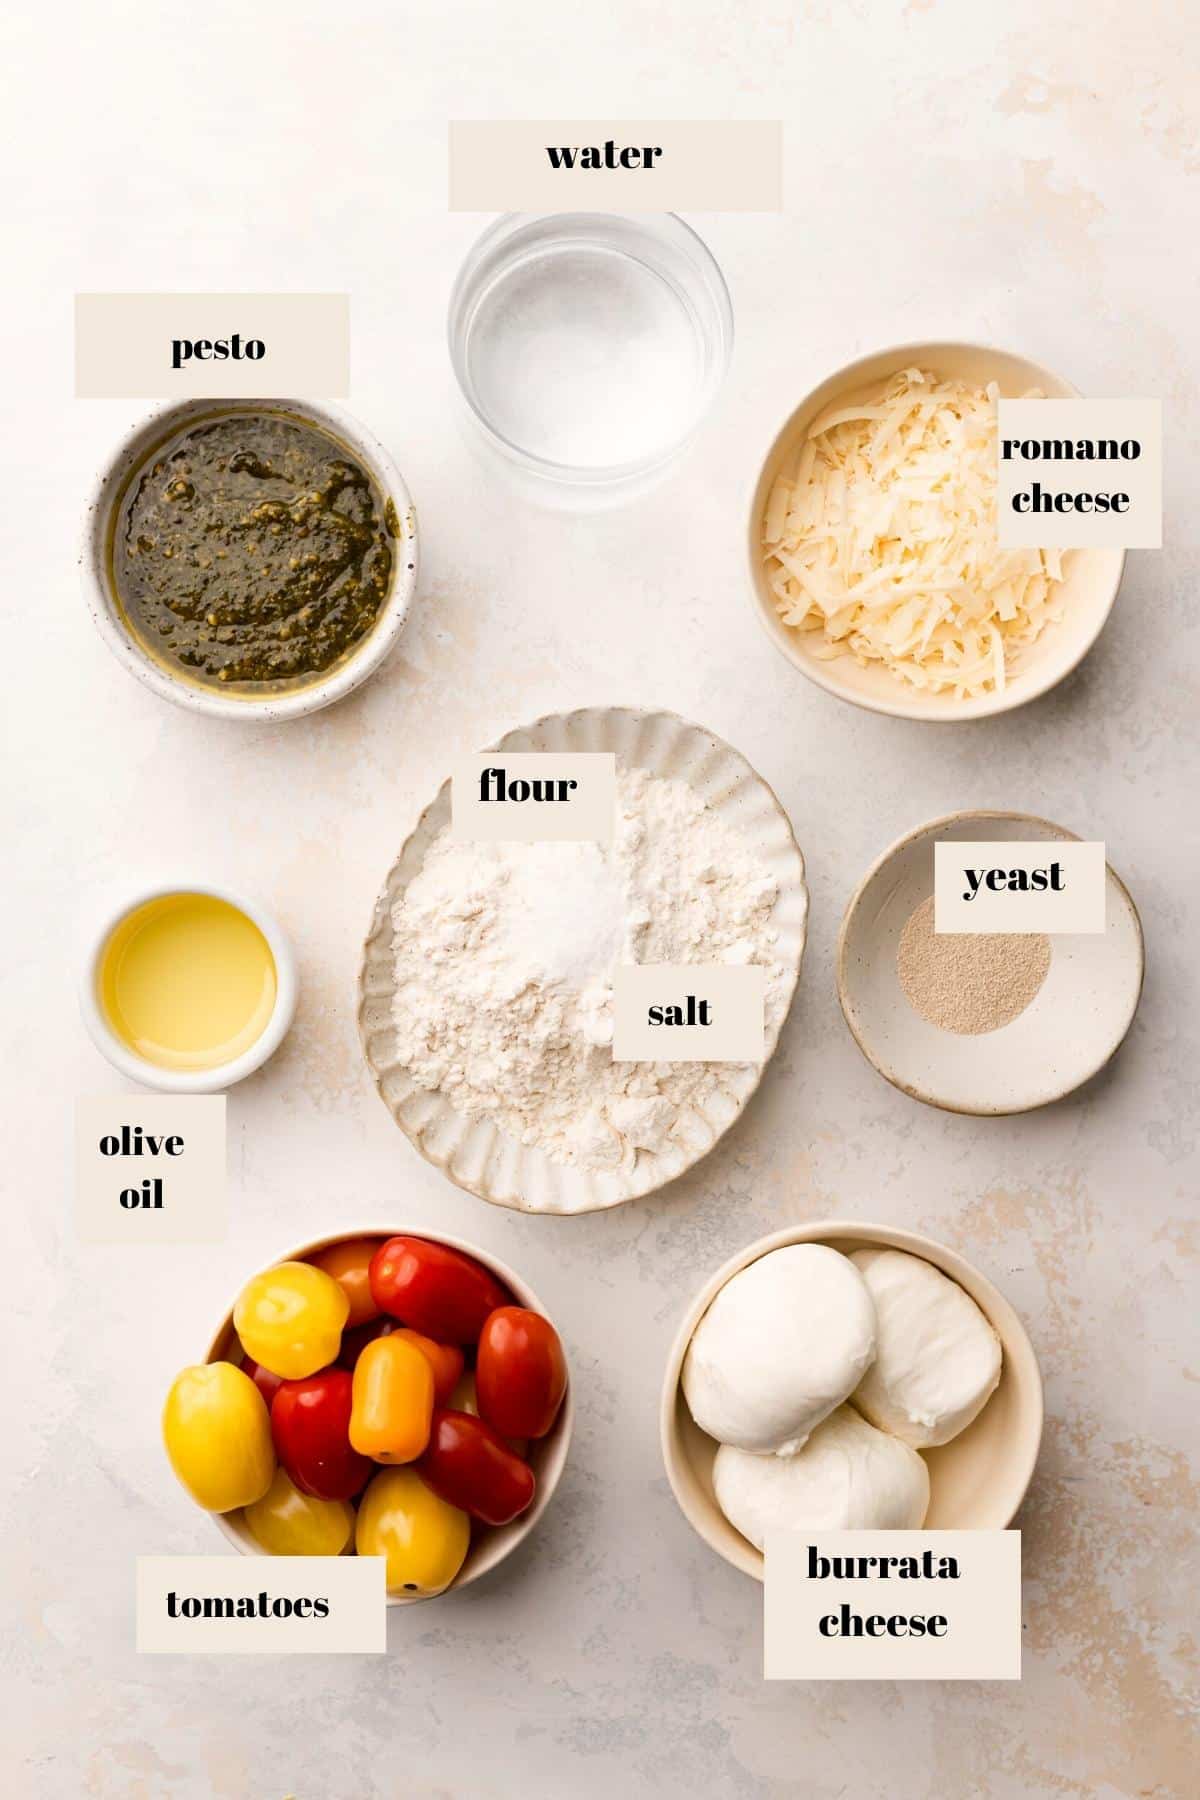 ingredients needed to make focaccia pizza.